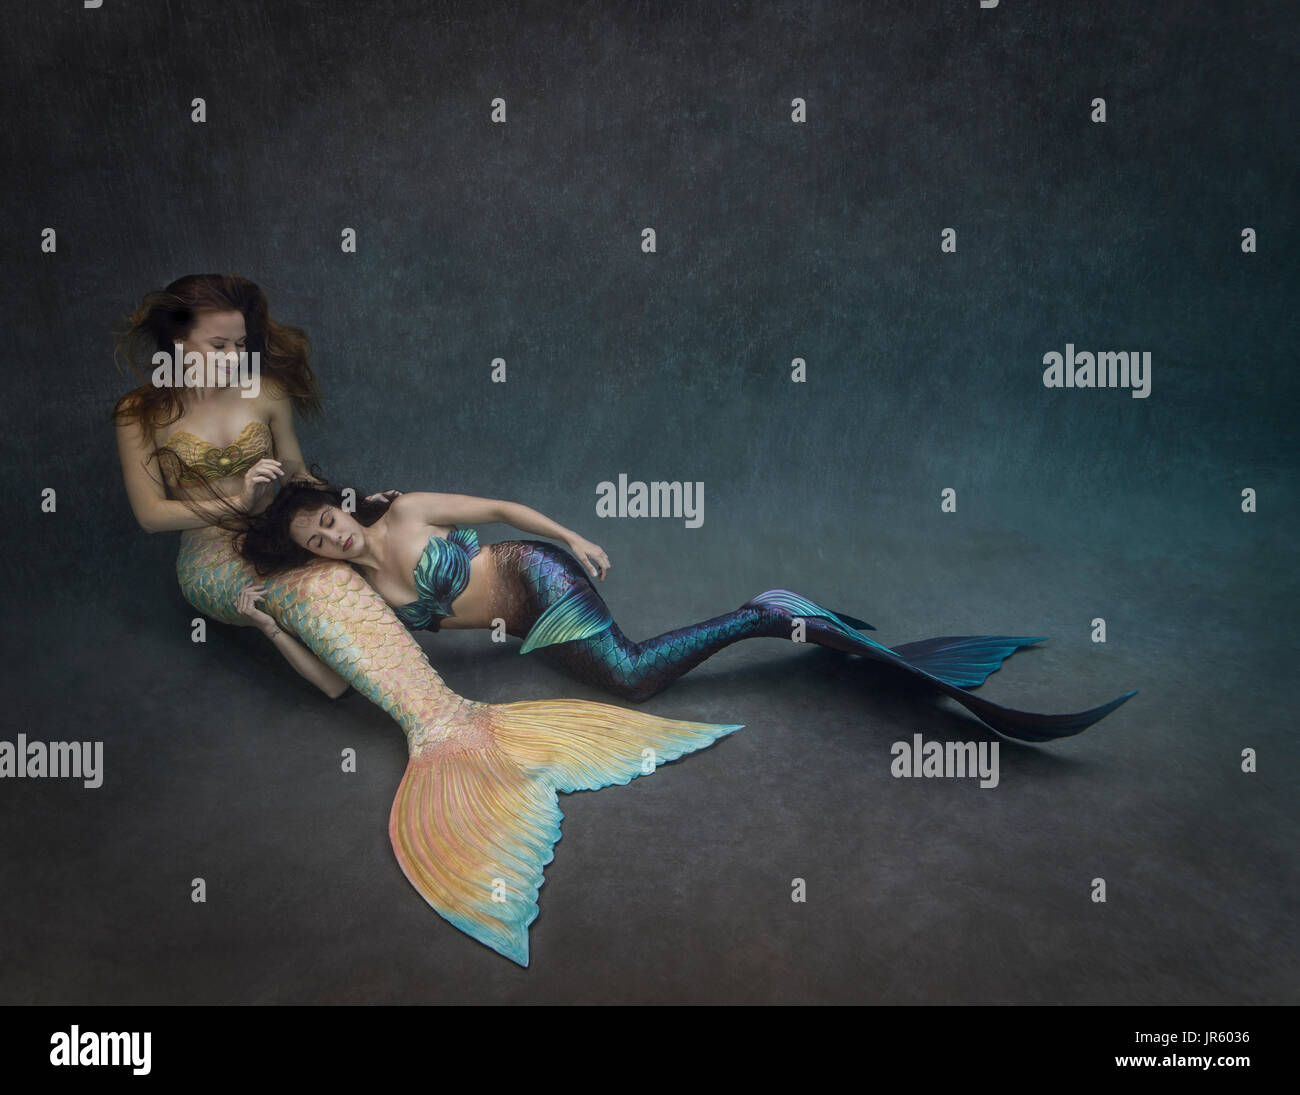 Two young mermaids relaxing together Stock Photo